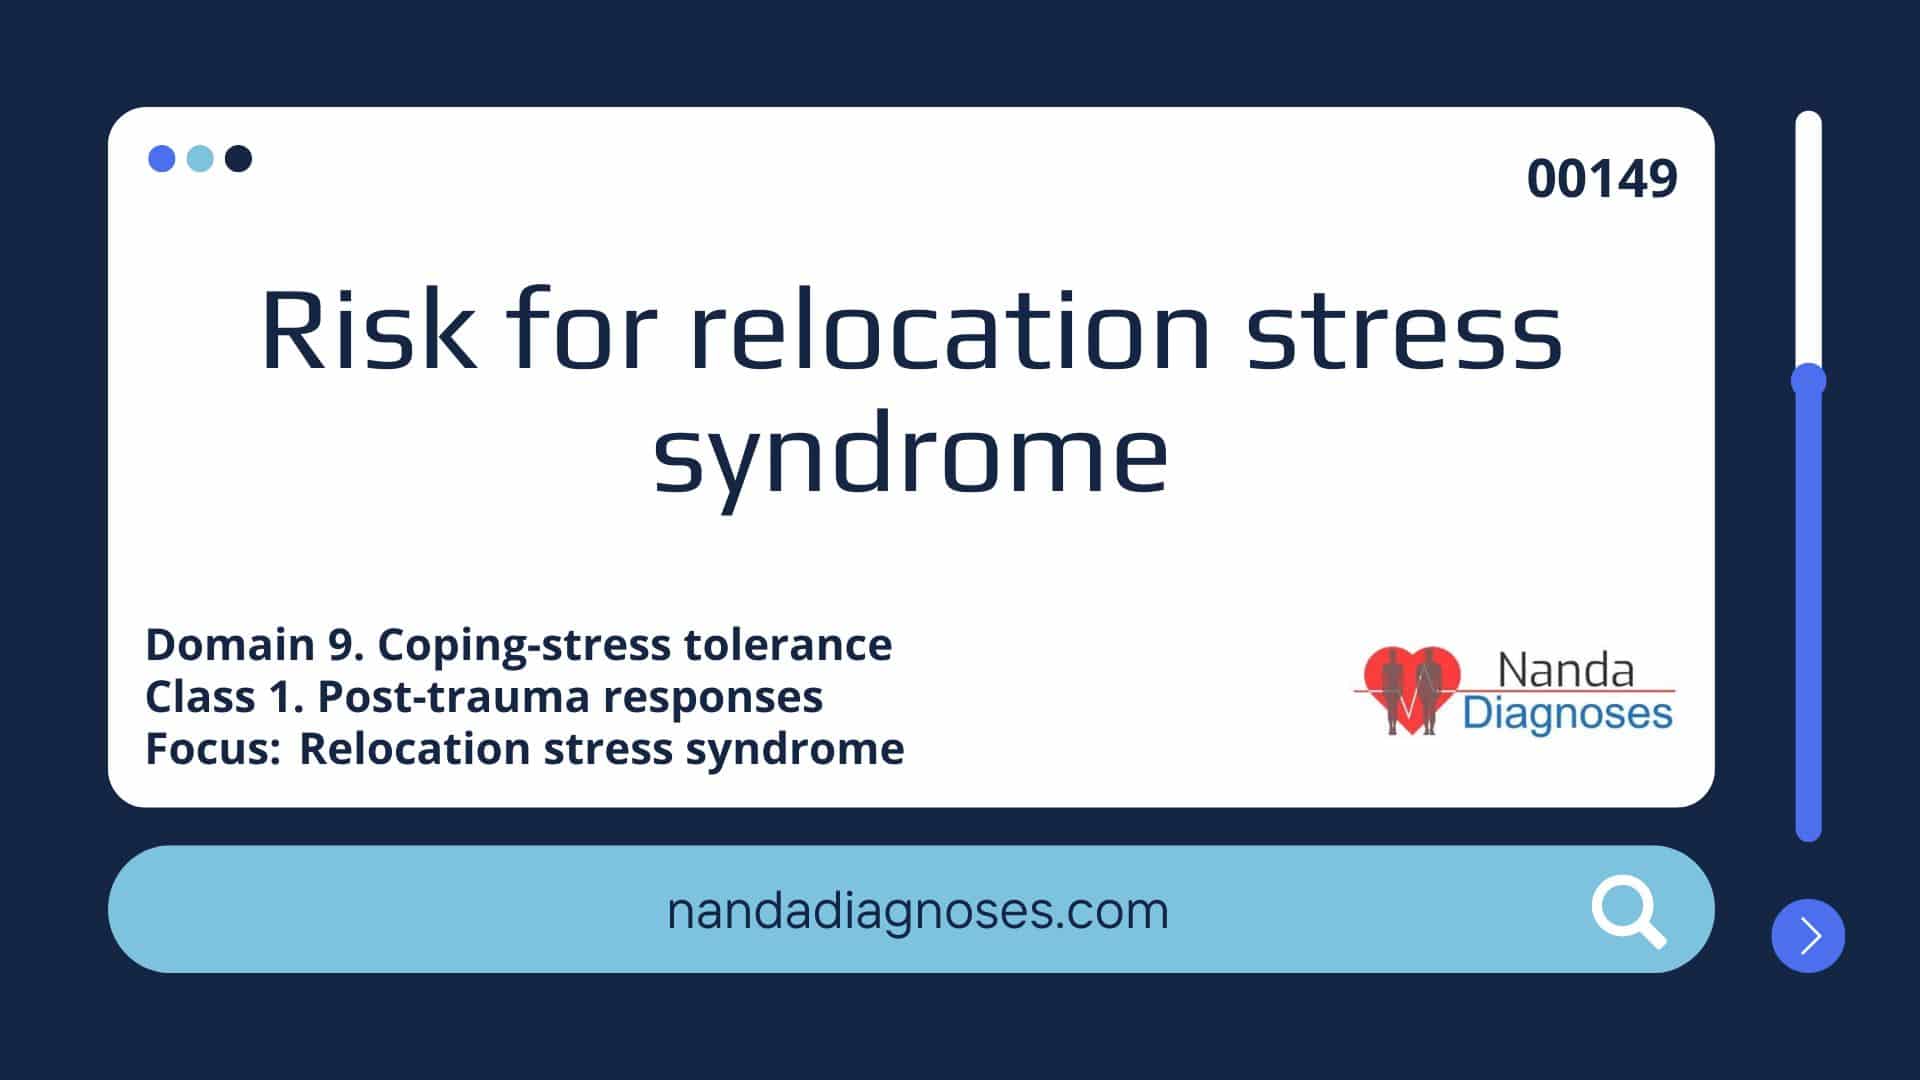 Nursing diagnosis Risk for relocation stress syndrome